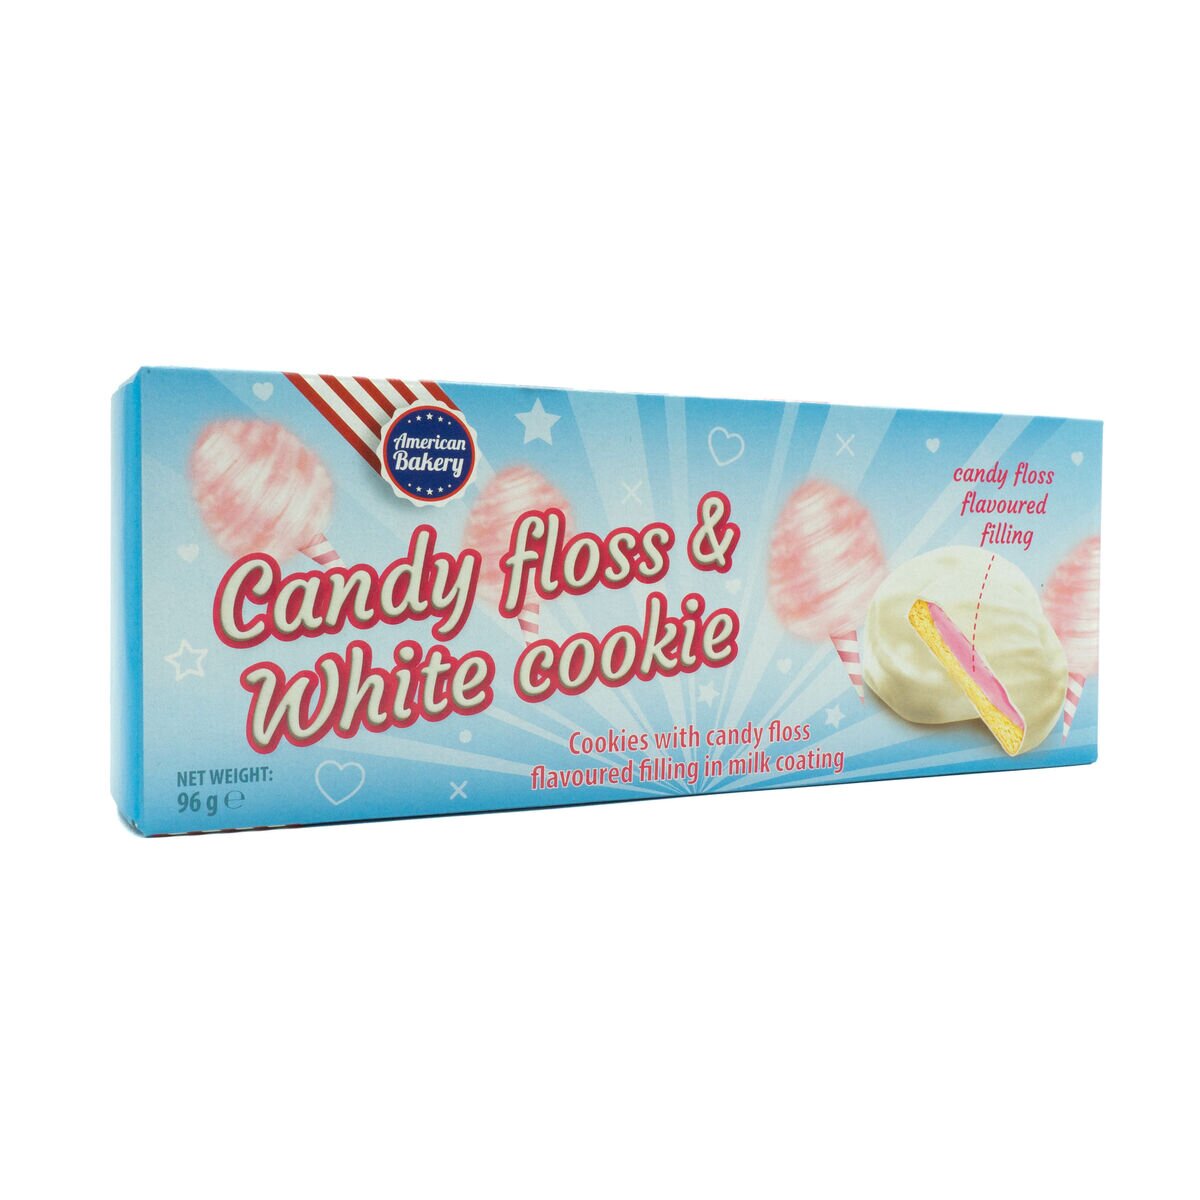 Candy floss & White Cookie (96g)